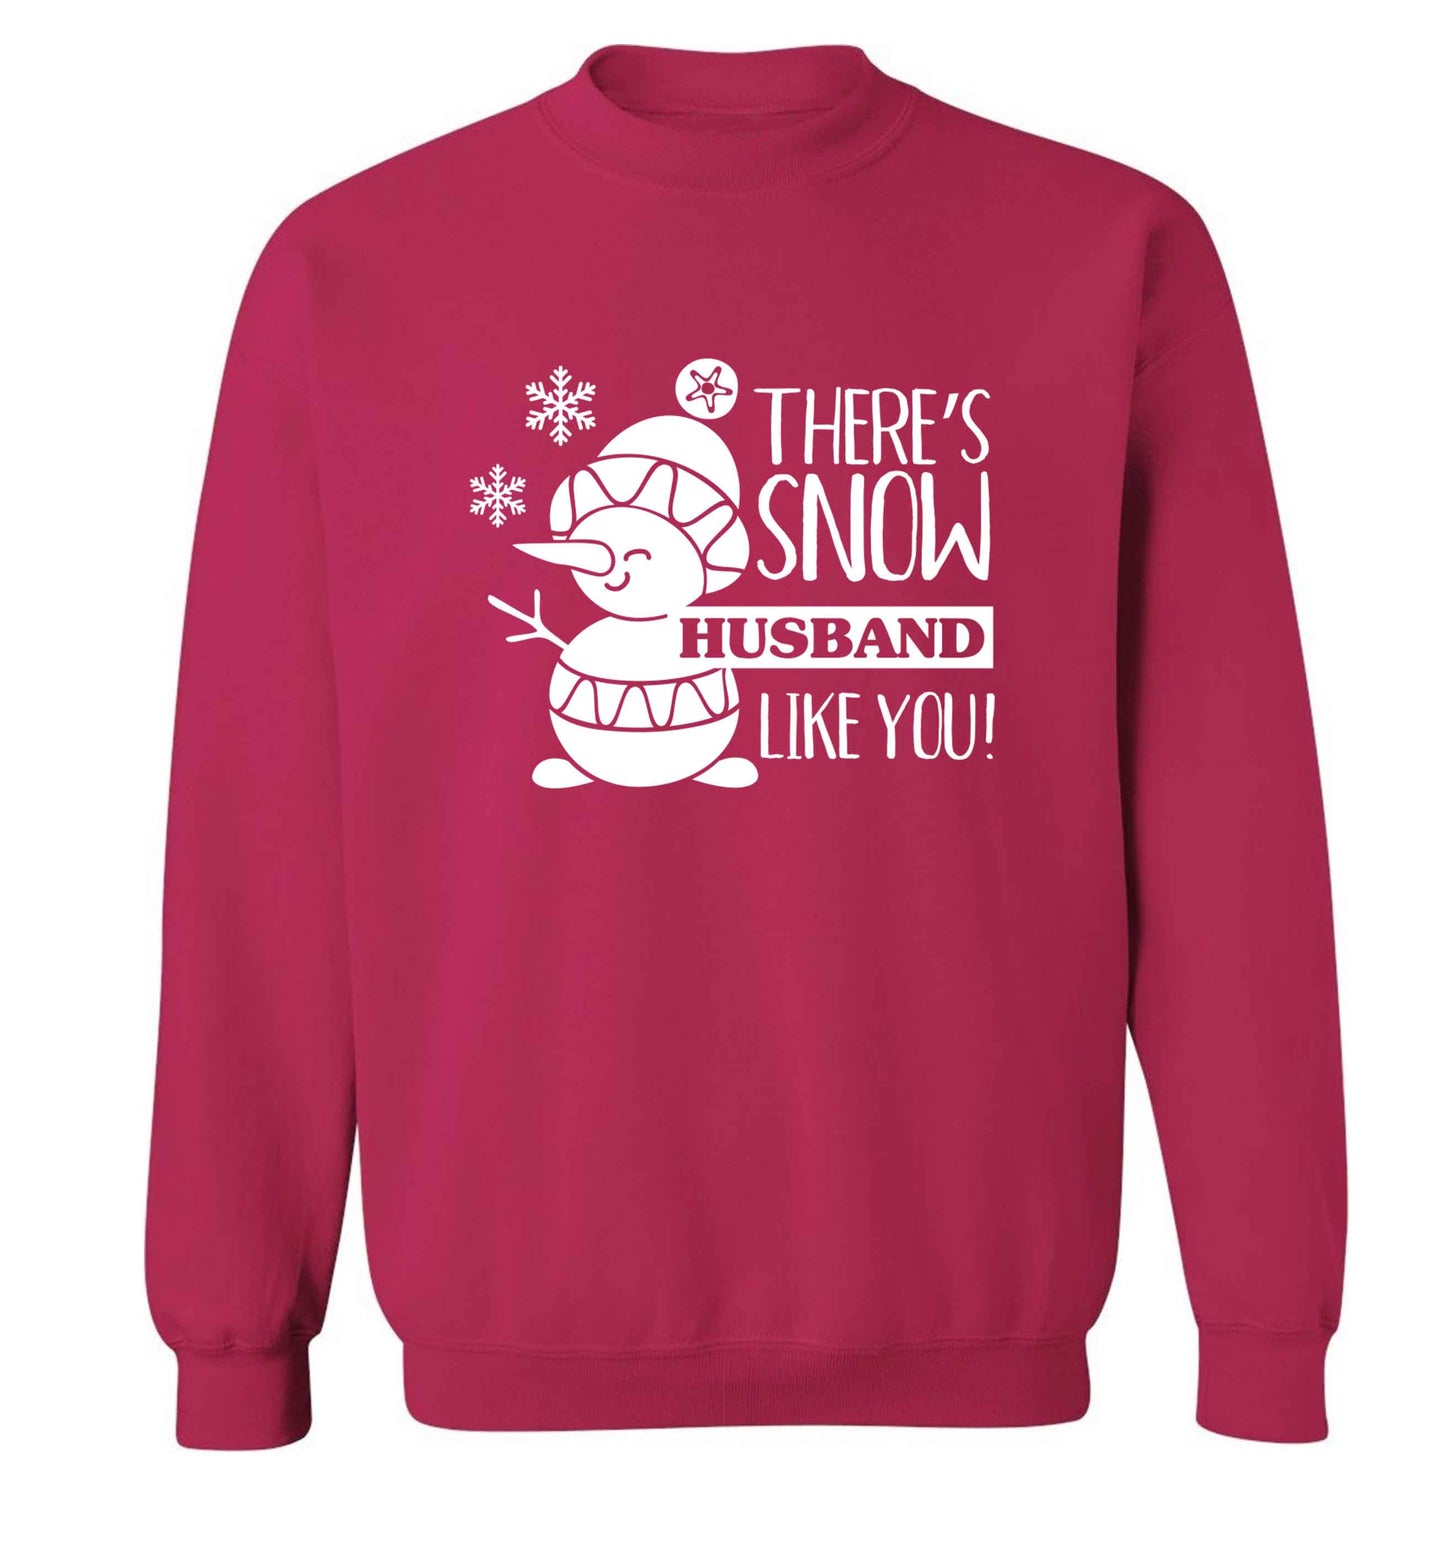 There's snow husband like you adult's unisex pink sweater 2XL